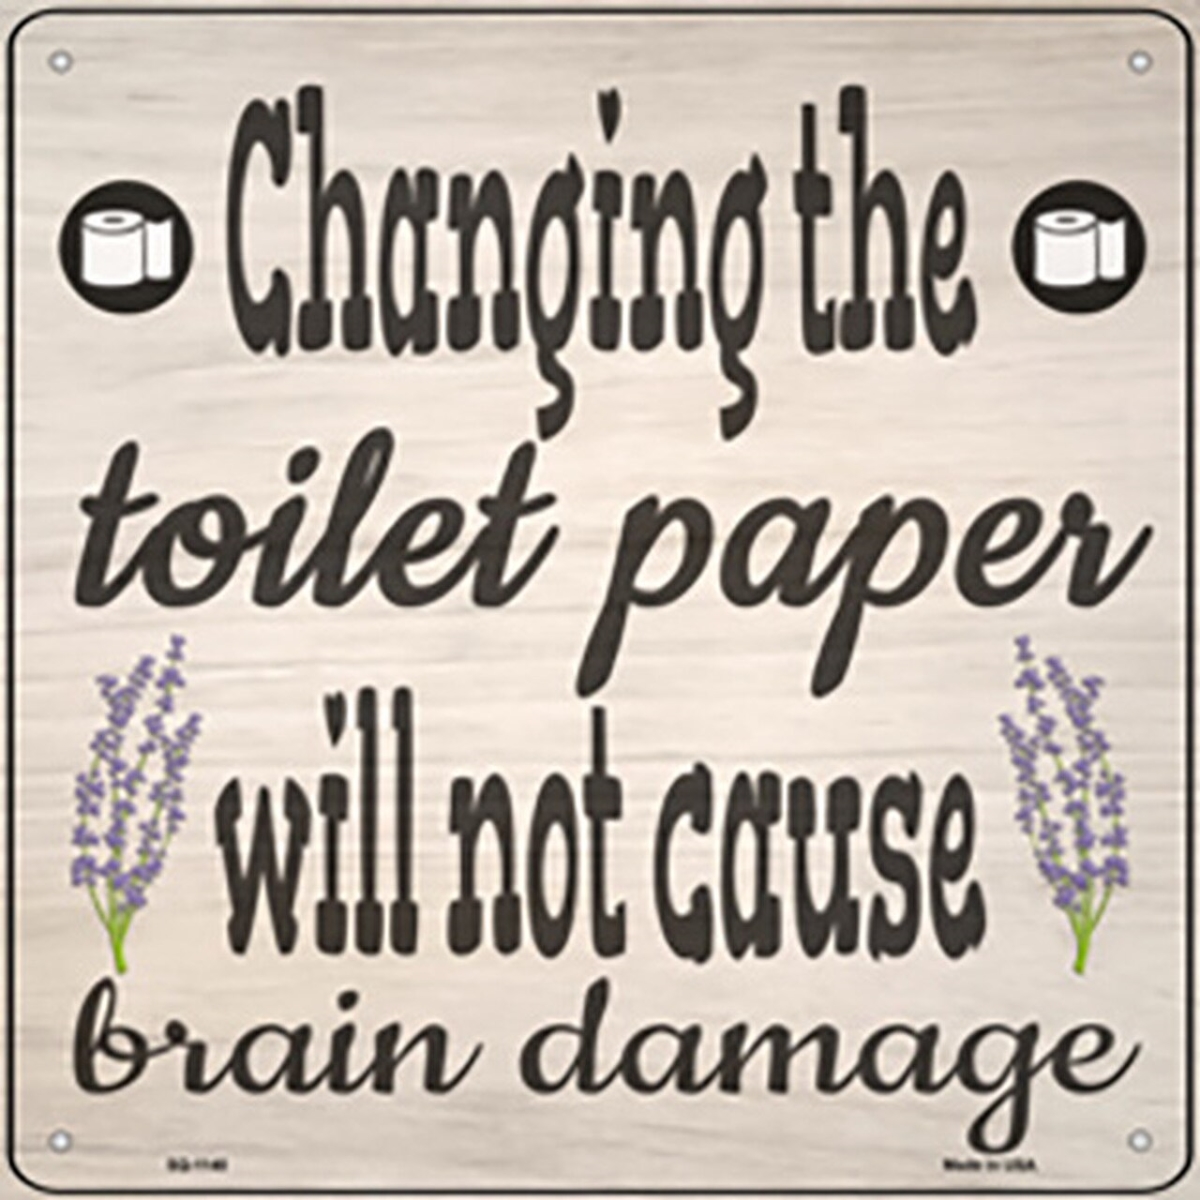 SQ-1140 12 x 12 in. Change The Toiler Paper Novelty Metal Square Sign -  Smart Blonde